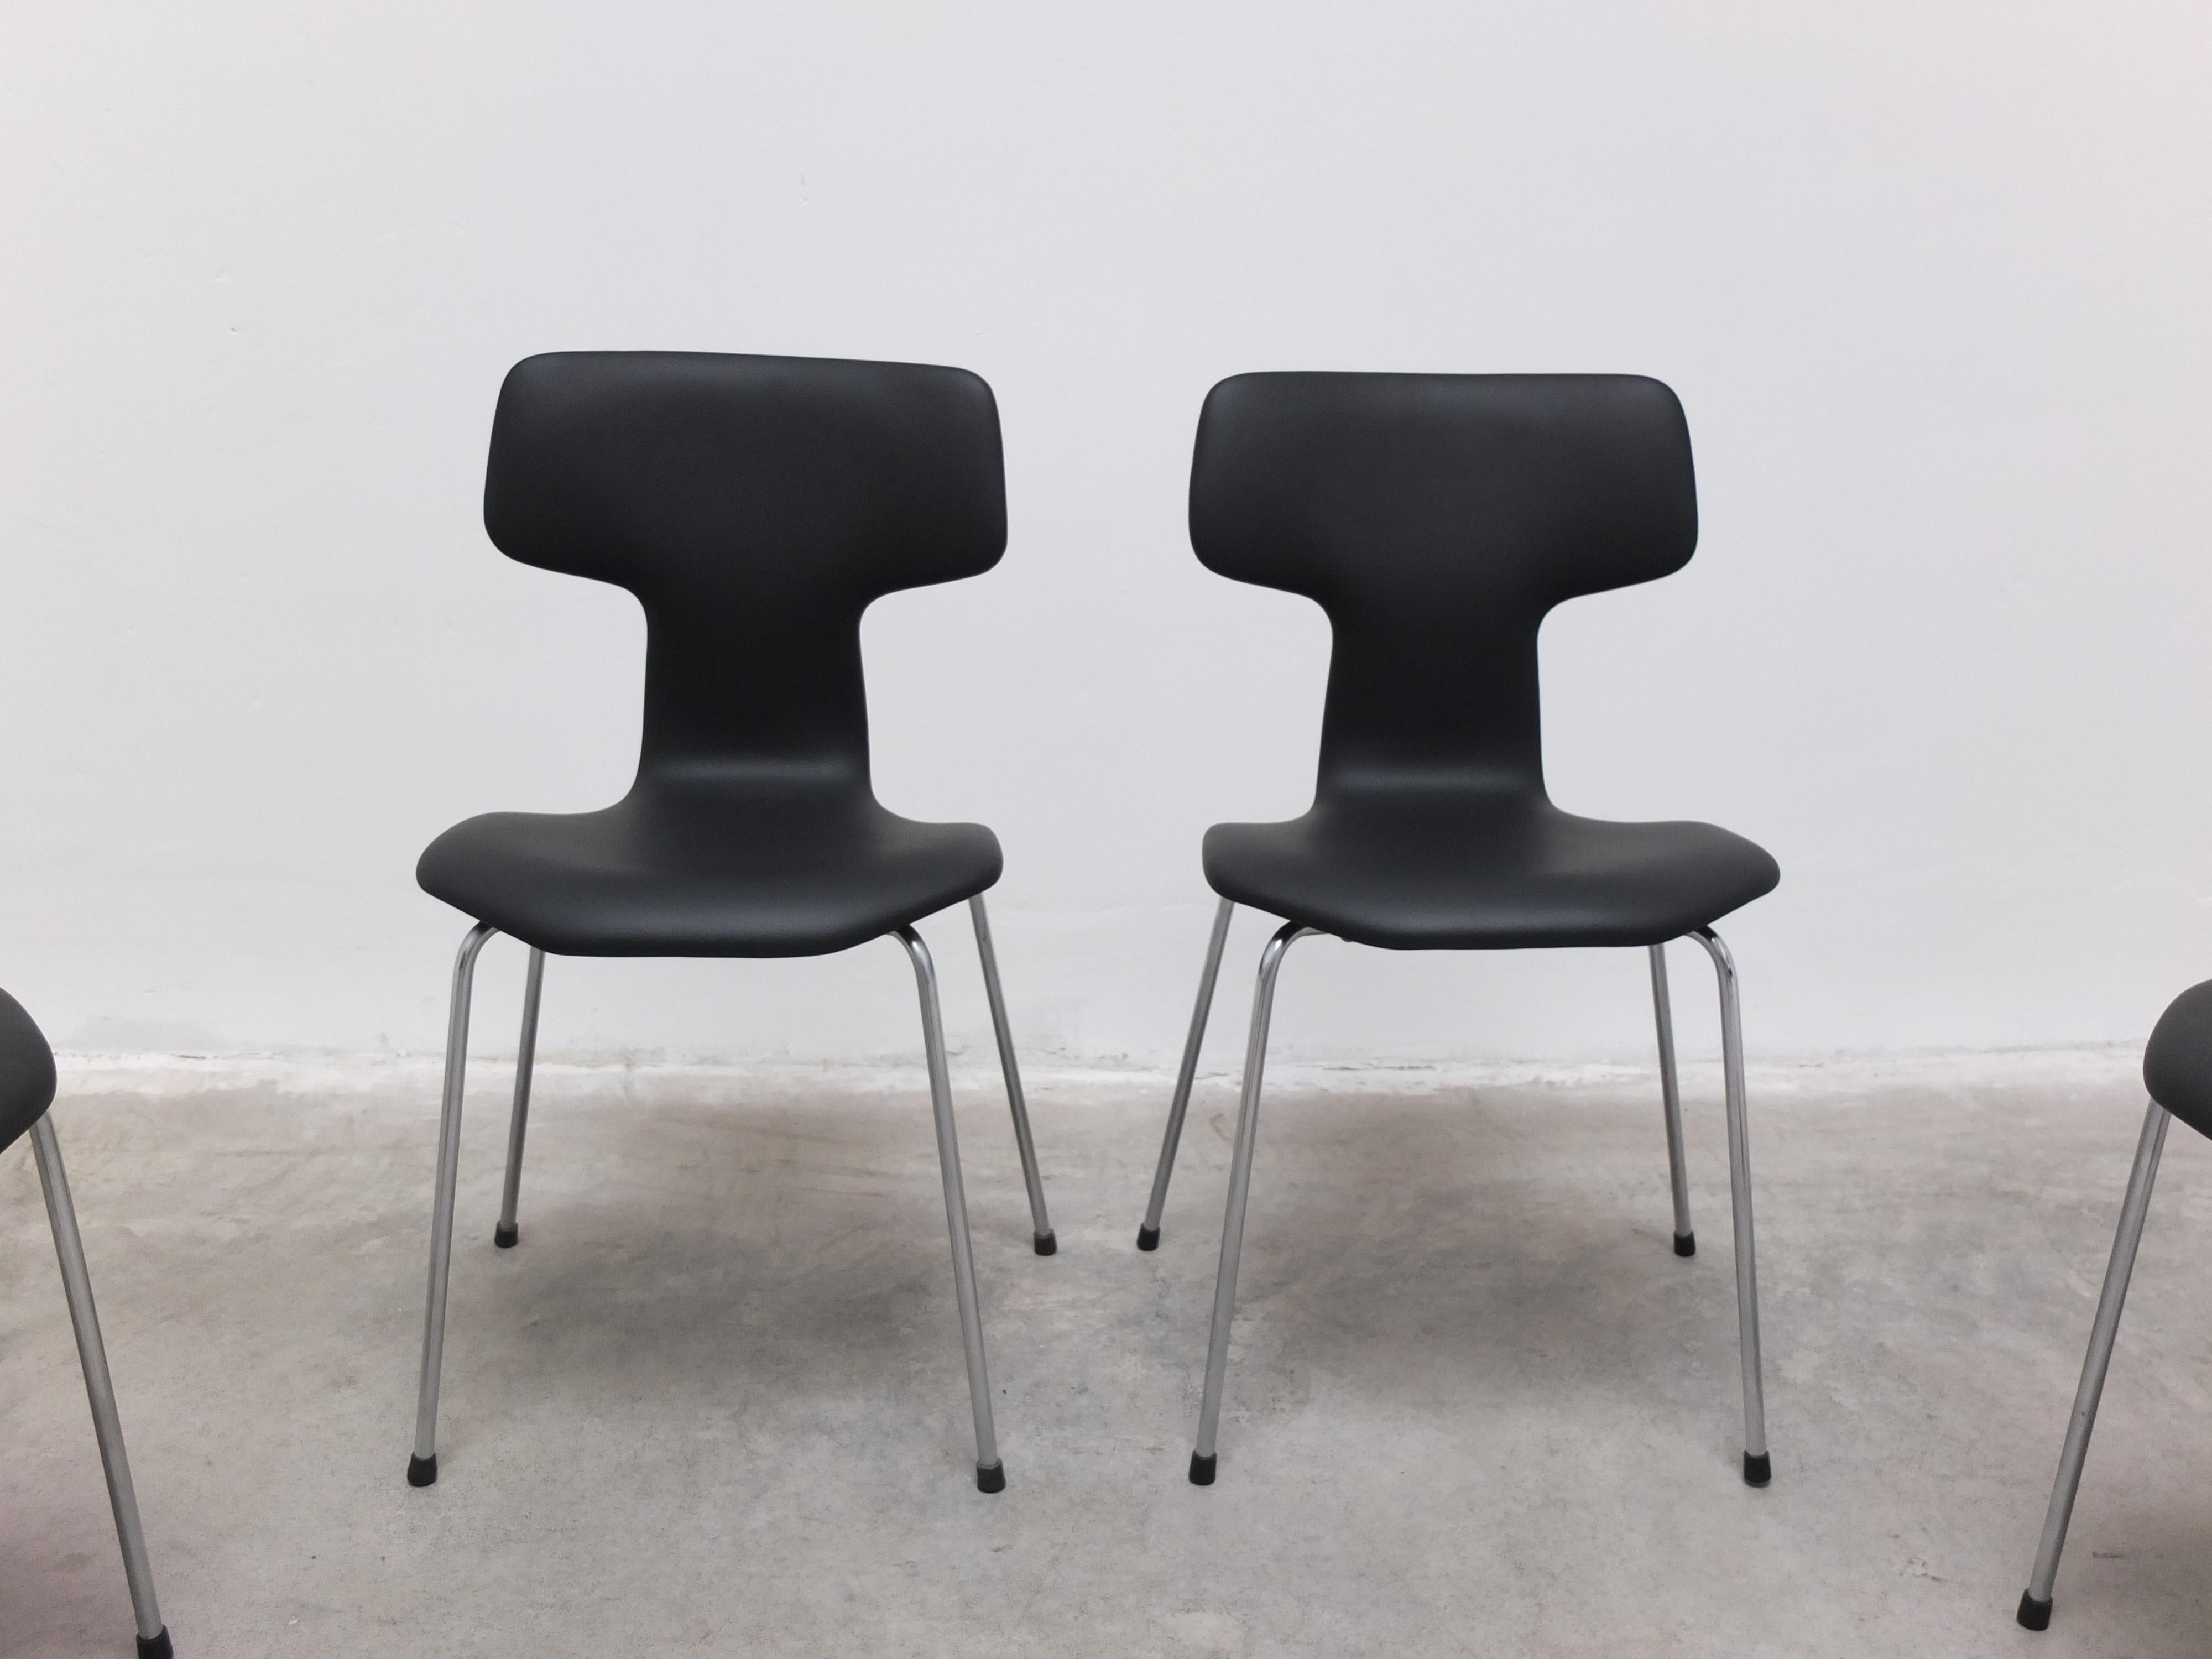 Set of 6 'Hammer' Chairs in Leather by Arne Jacobsen for Fritz Hansen, 1967 For Sale 1